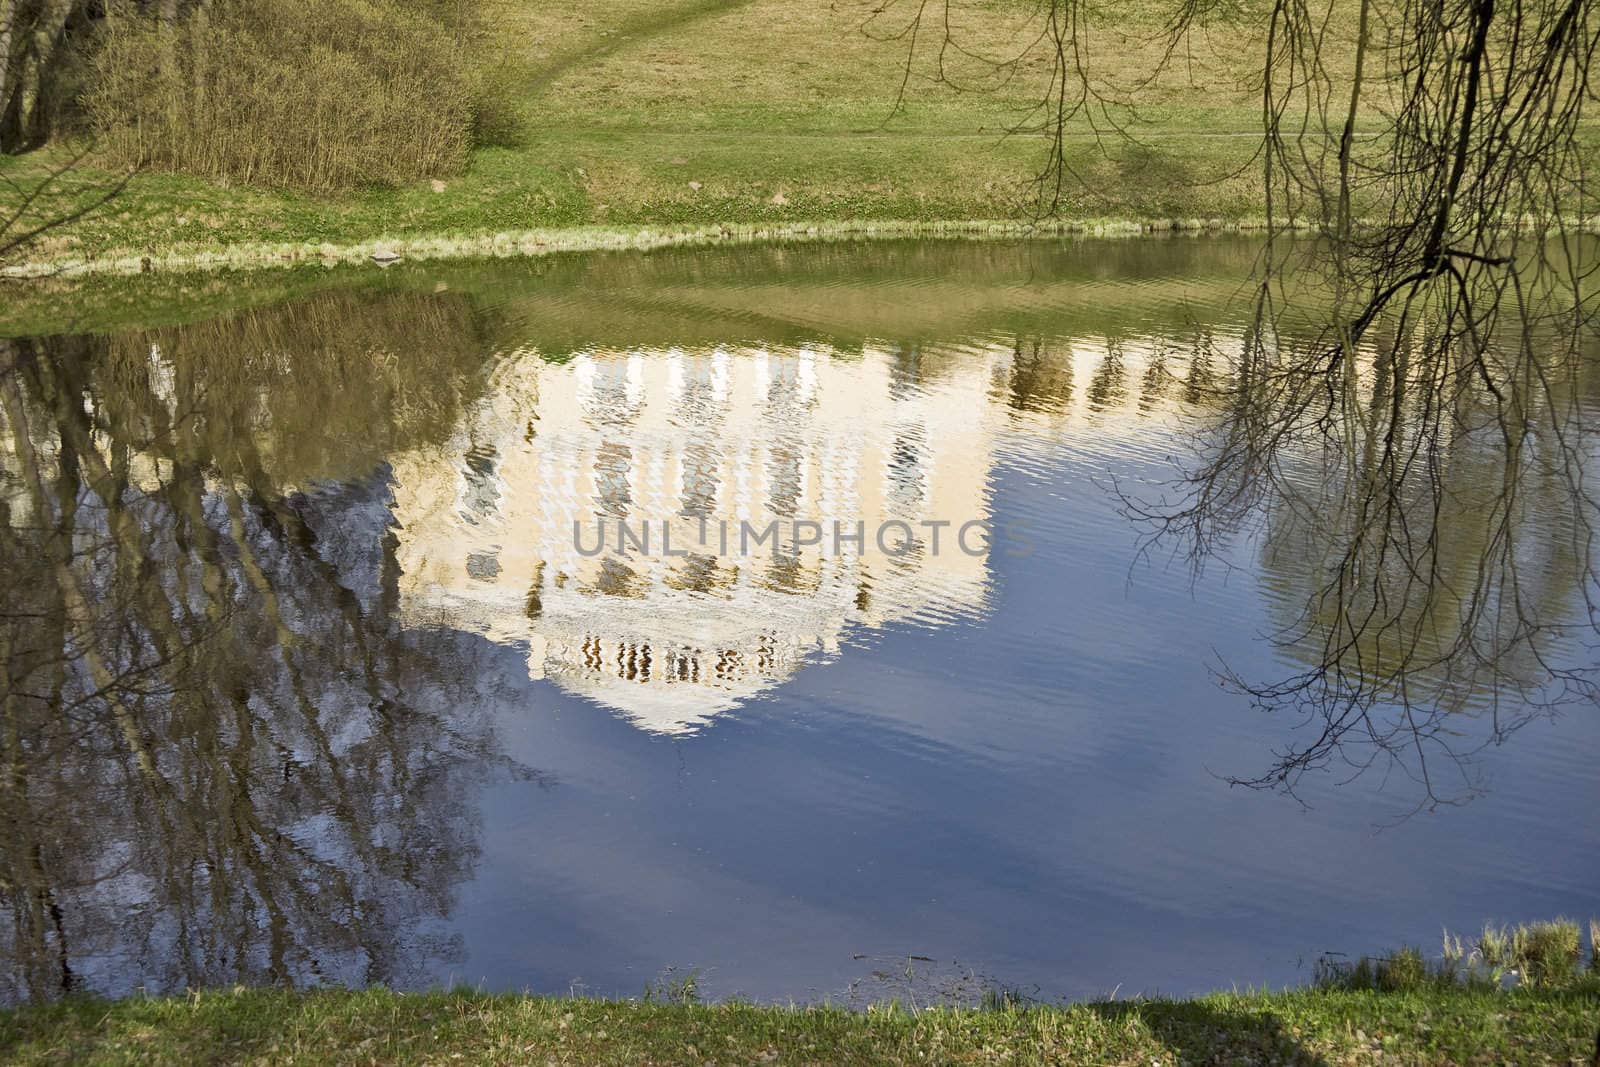 Palace and blue sky reflection in river water